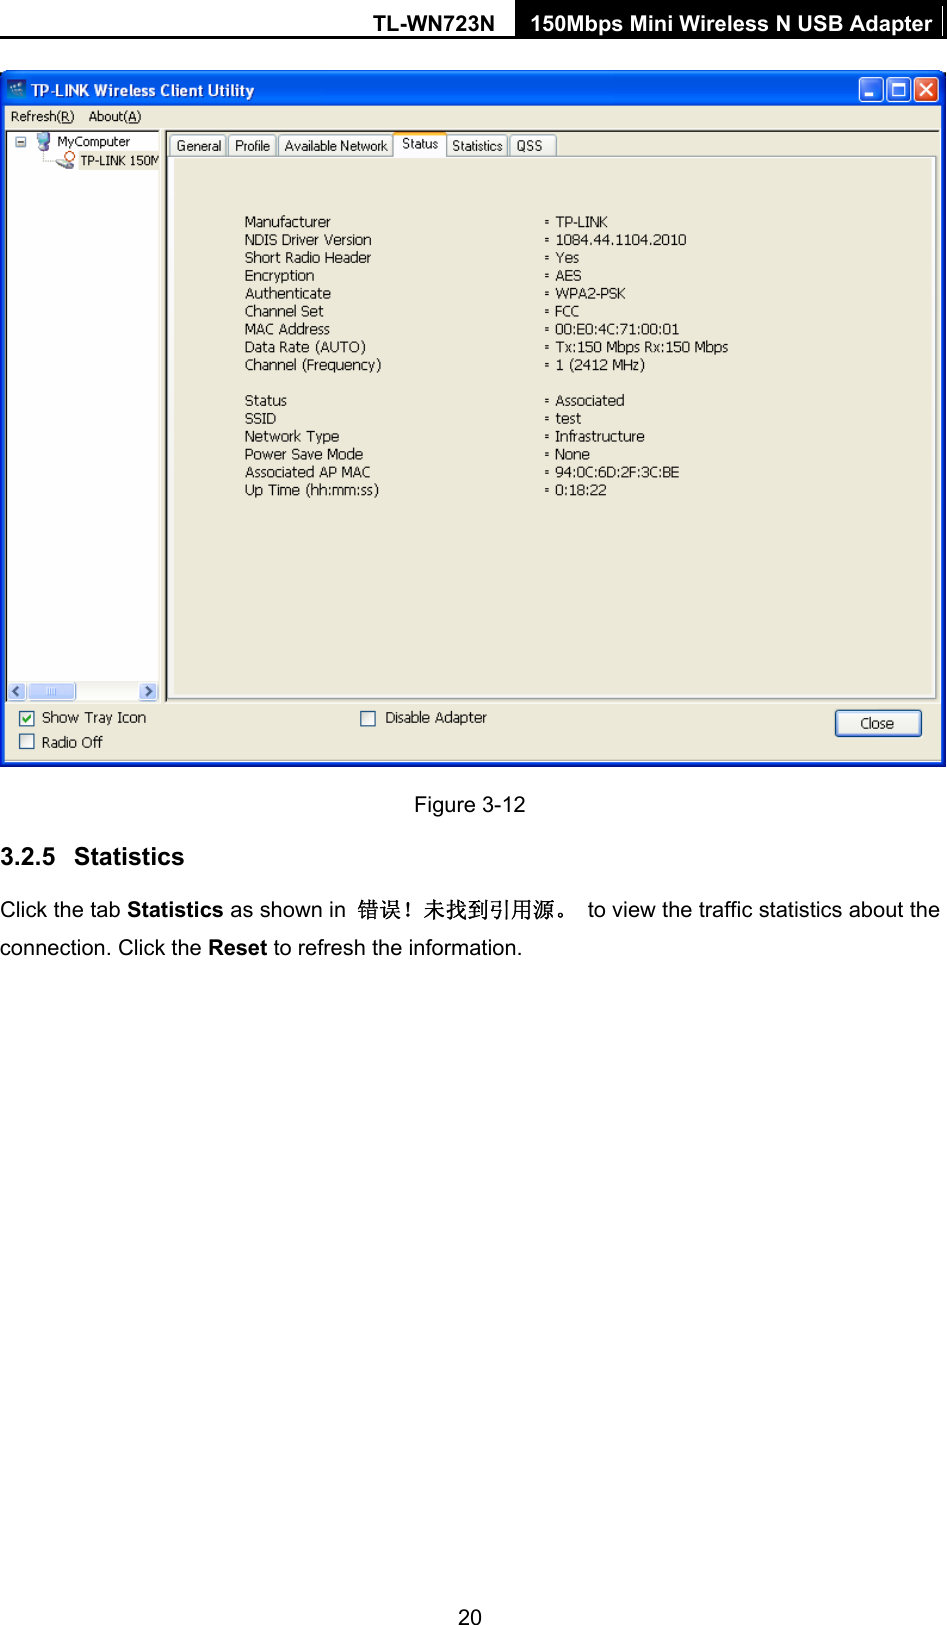 TL-WN723N  150Mbps Mini Wireless N USB Adapter 20  Figure 3-12 3.2.5  Statistics Click the tab Statistics as shown in  错误！未找到引用源。  to view the traffic statistics about the connection. Click the Reset to refresh the information. 